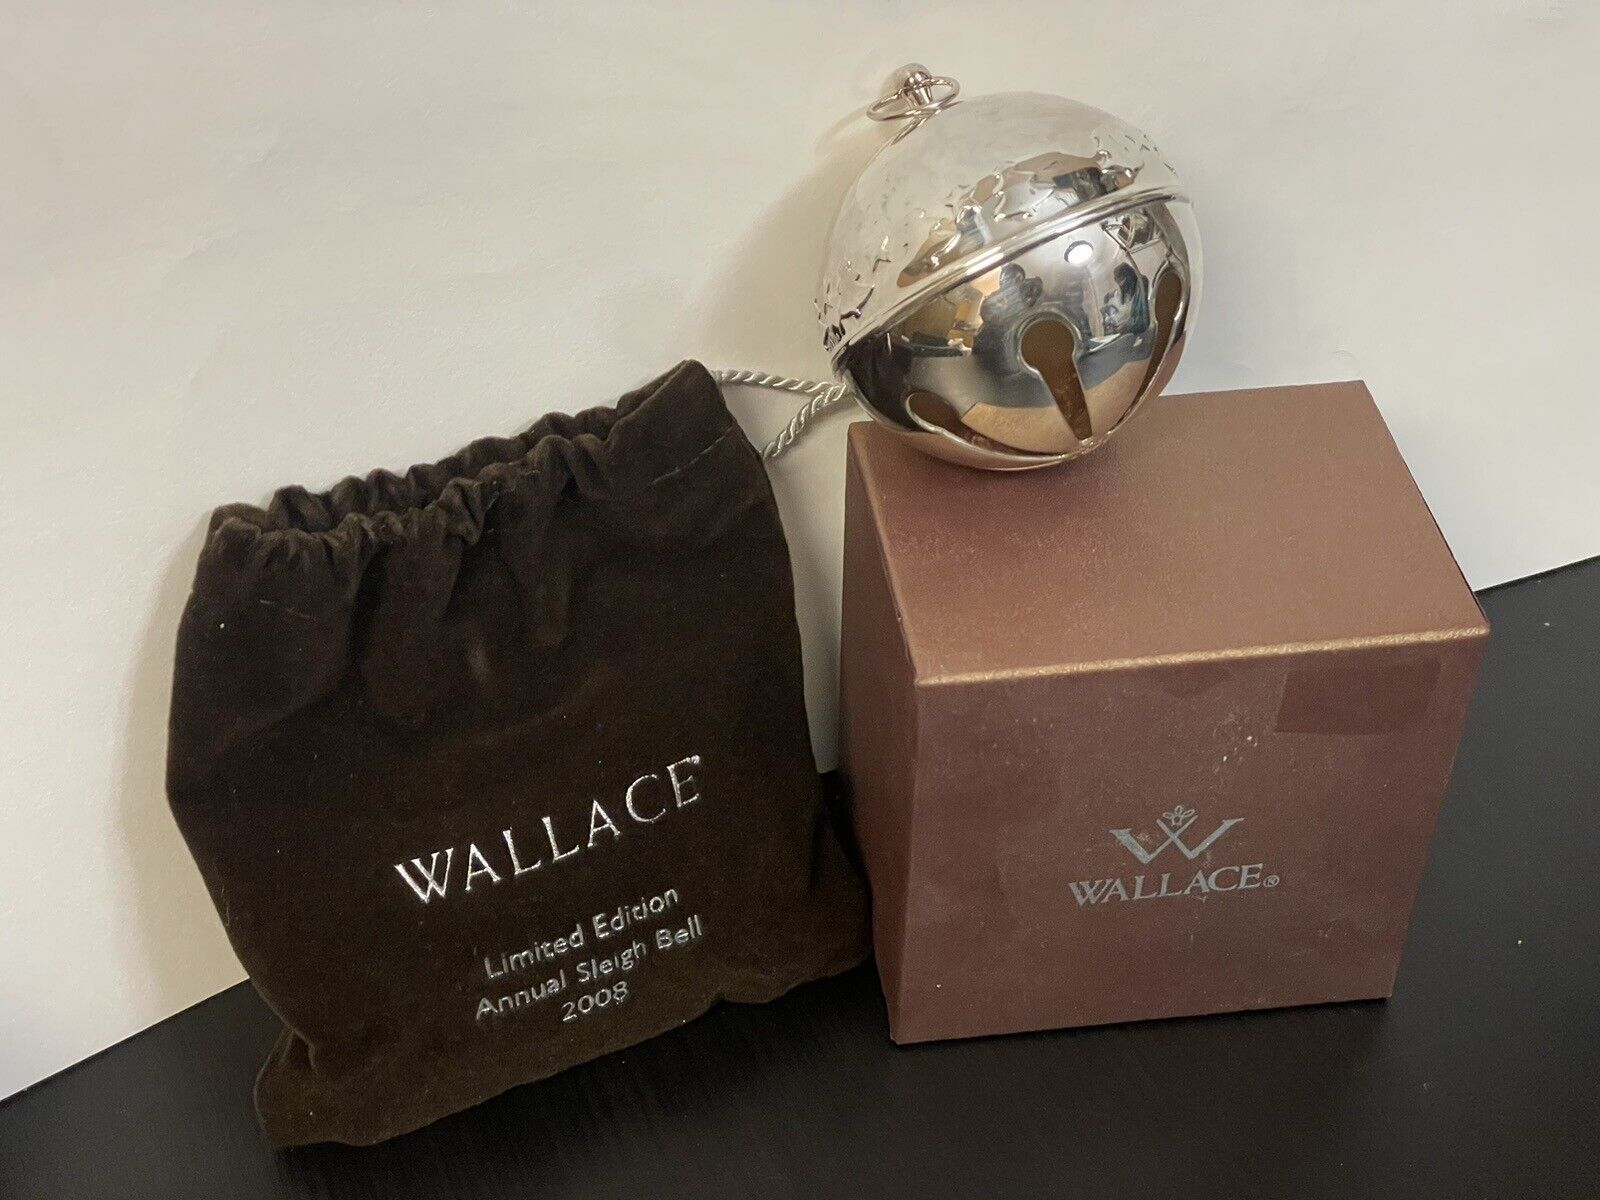 Wallace Silversmiths Limited Edition 2008 Annual Sleigh Christmas Bell